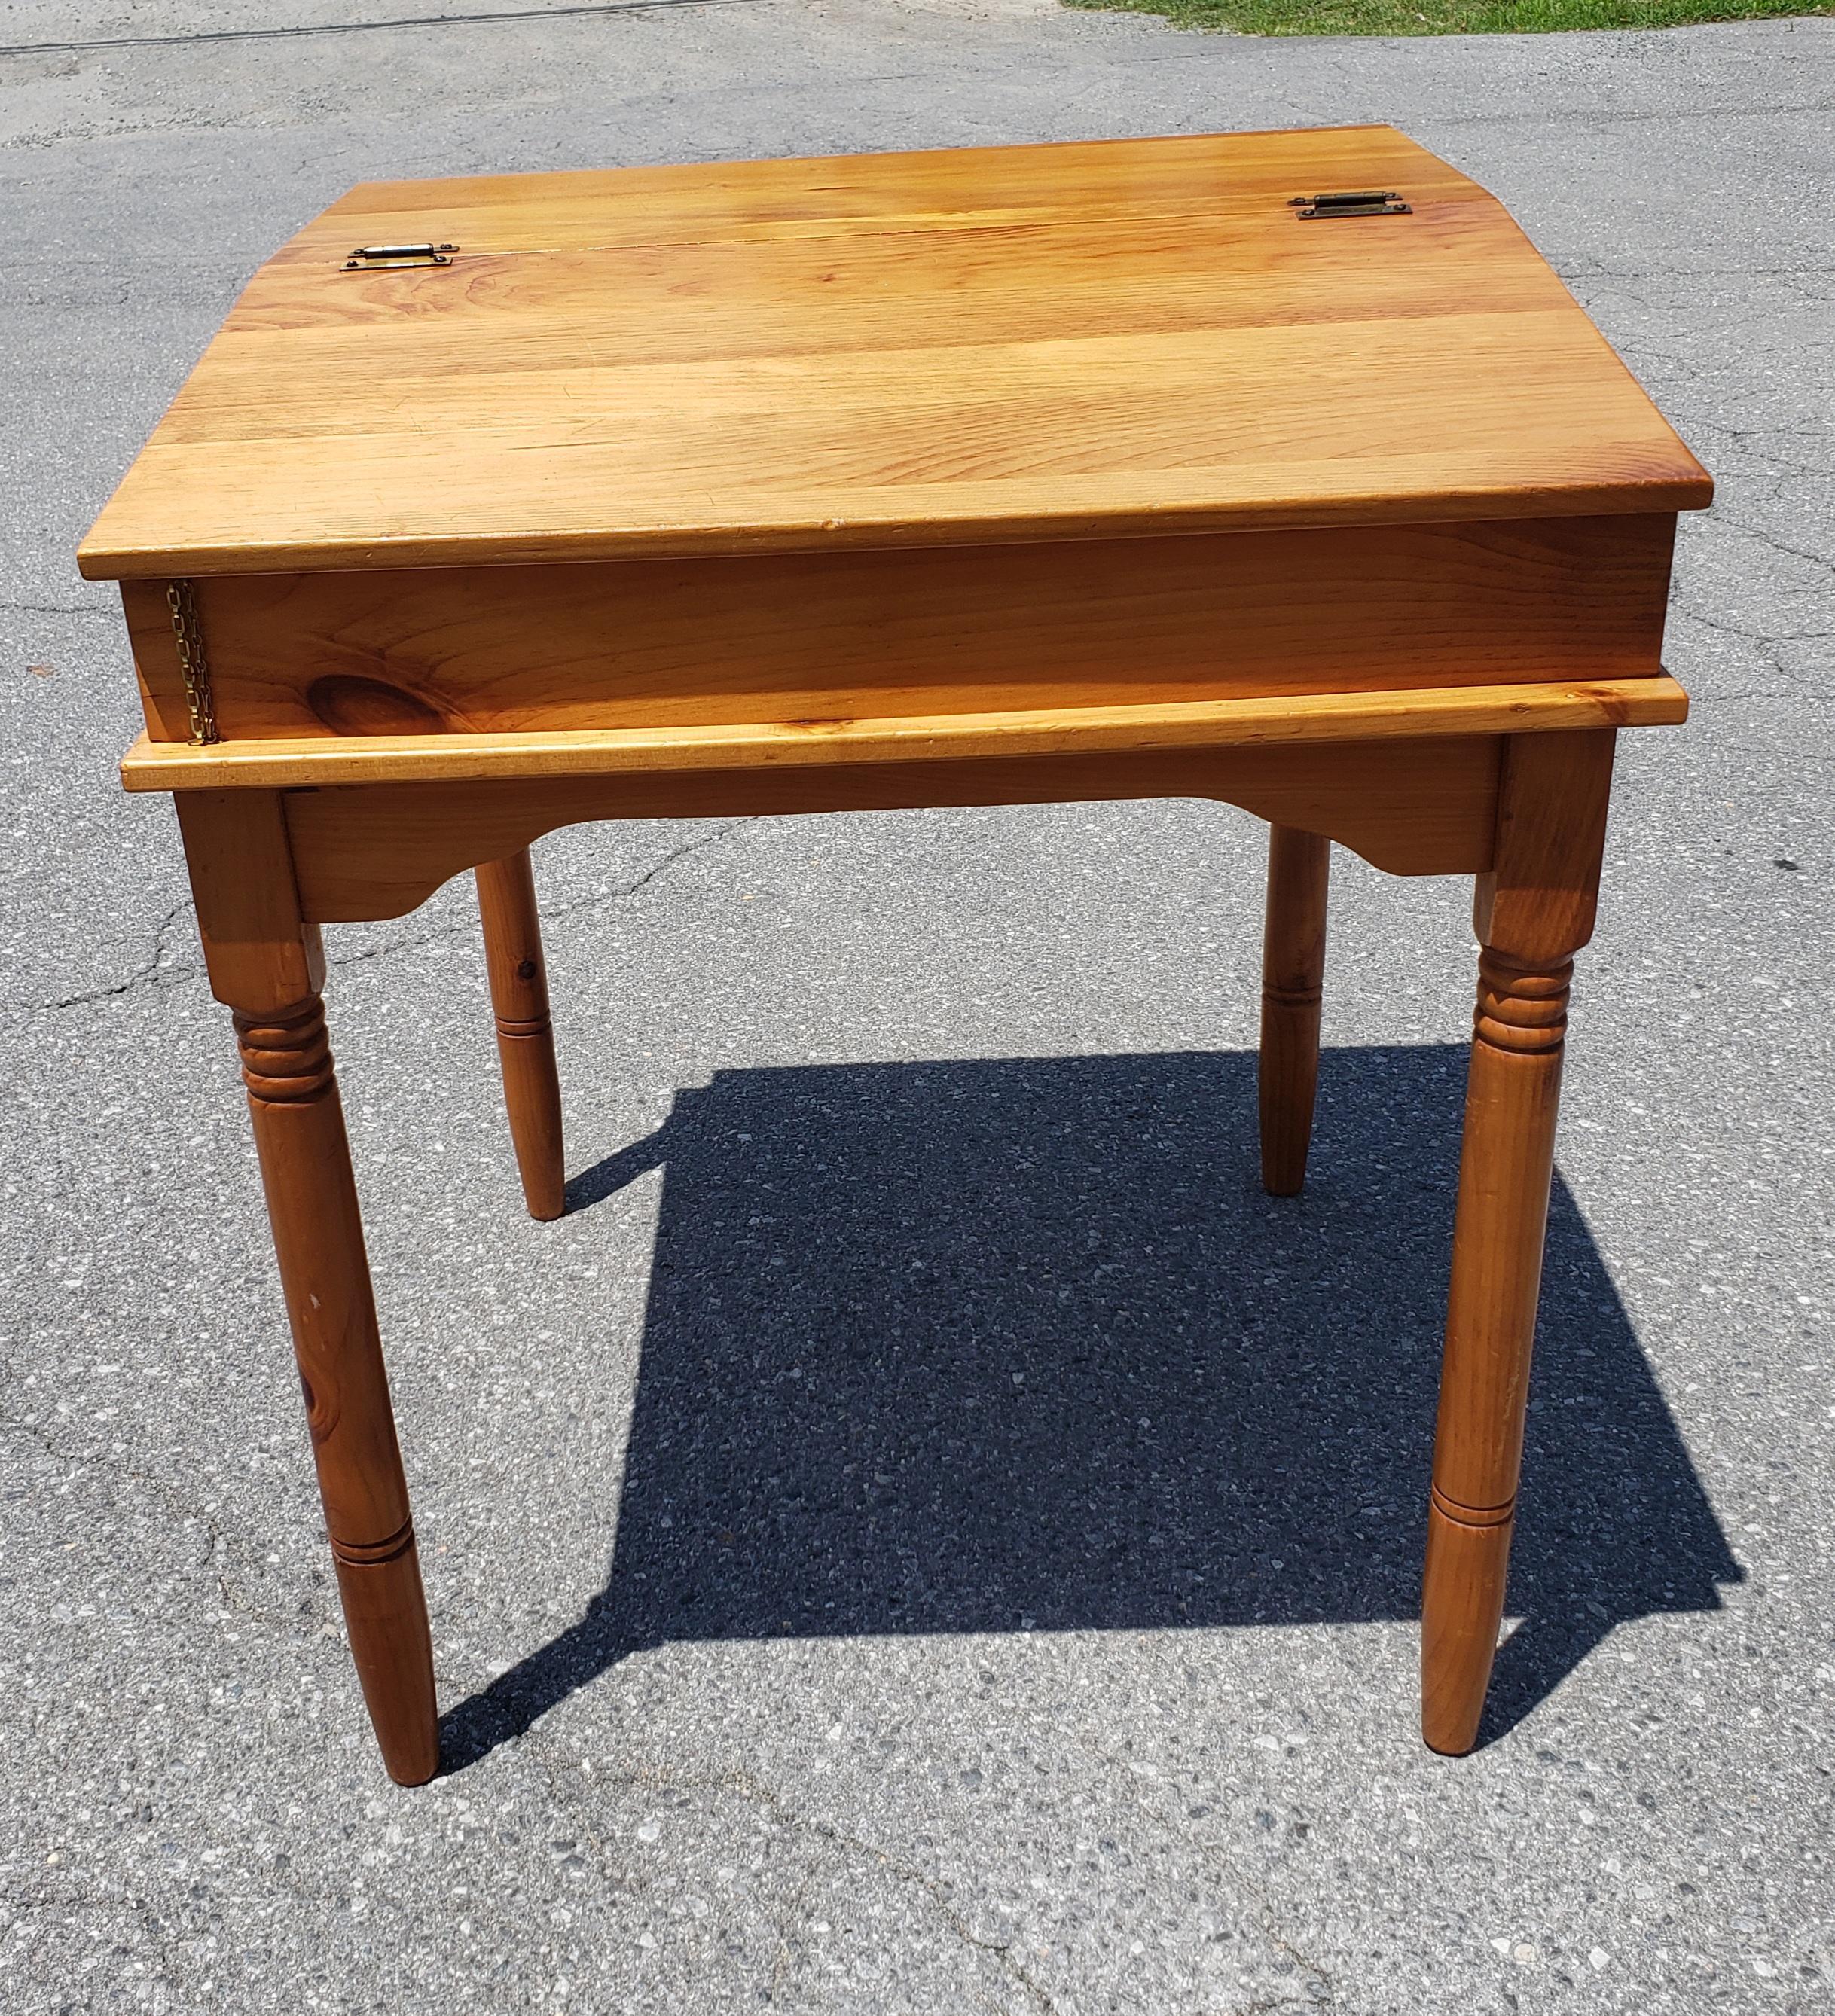 A beautifully hand-crafted early American Style Solid Pine Writing Desk in good vintage condition.   Measures 28